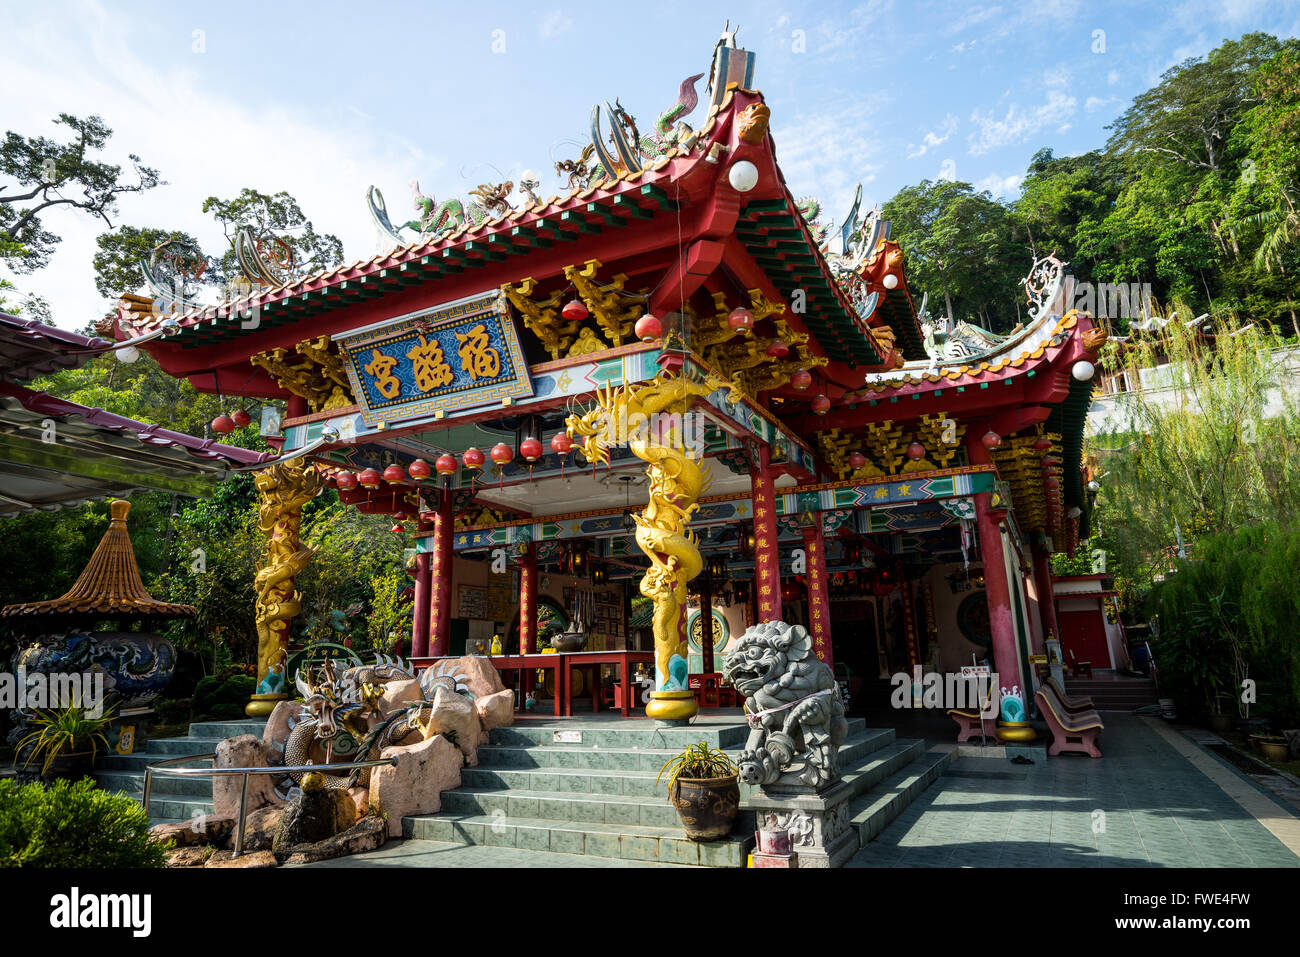 The ornate architecture at Fu Lin Kong Temple during Chinese New Year festive season in Pangkor island of Malaysia. Stock Photo